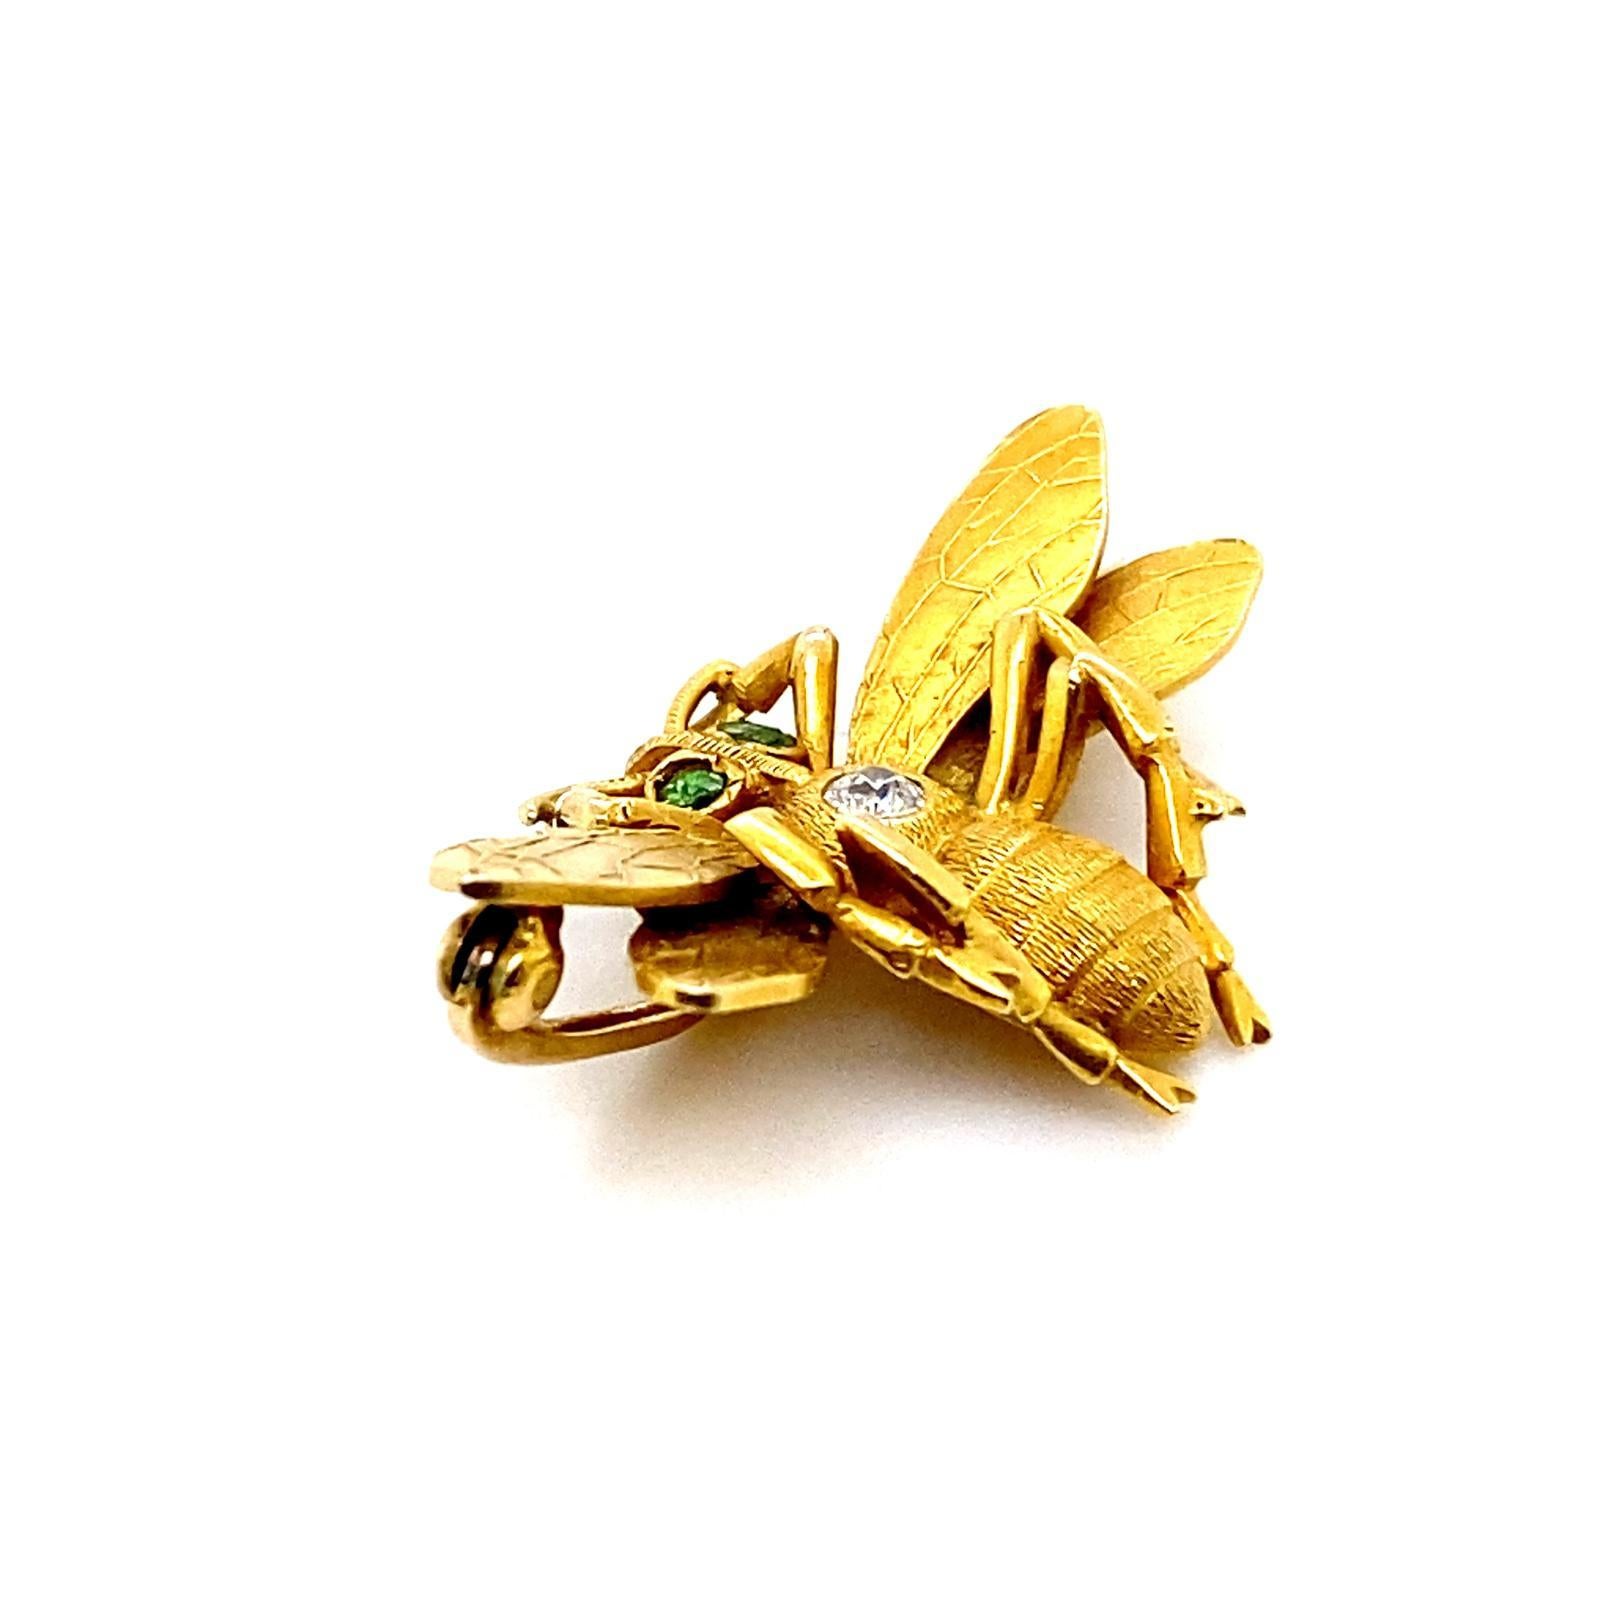 Vintage Art Nouveau Style Bee Brooch Pin Set in 18 Karat Yellow Gold In Good Condition For Sale In London, GB